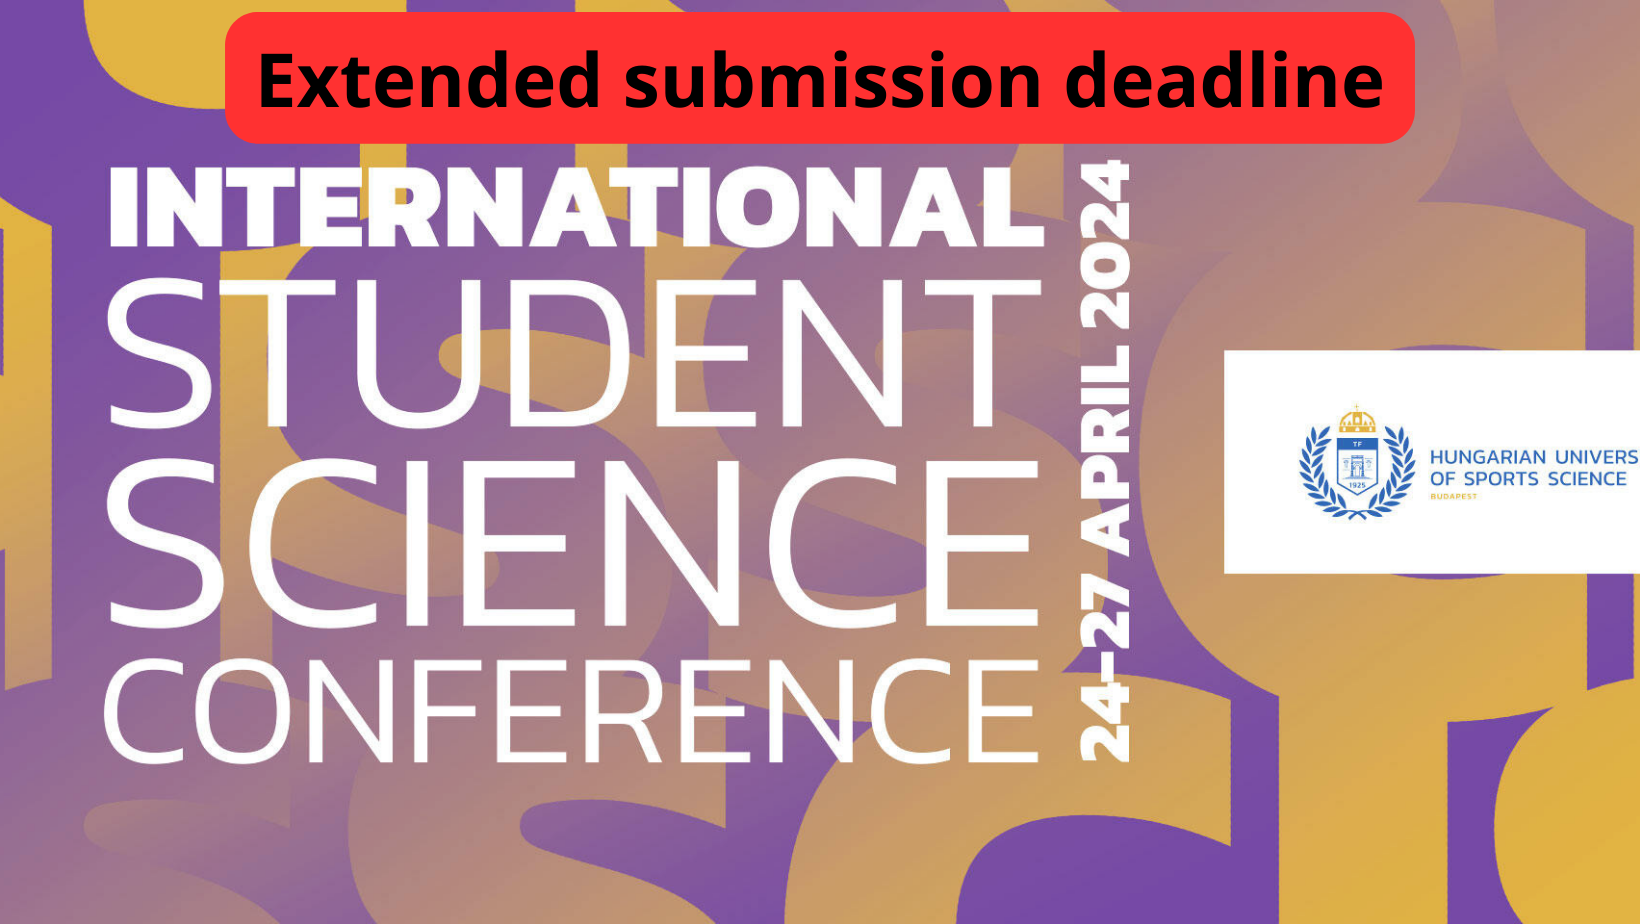 Deadline for abstracts at the International Student Science Conference extended